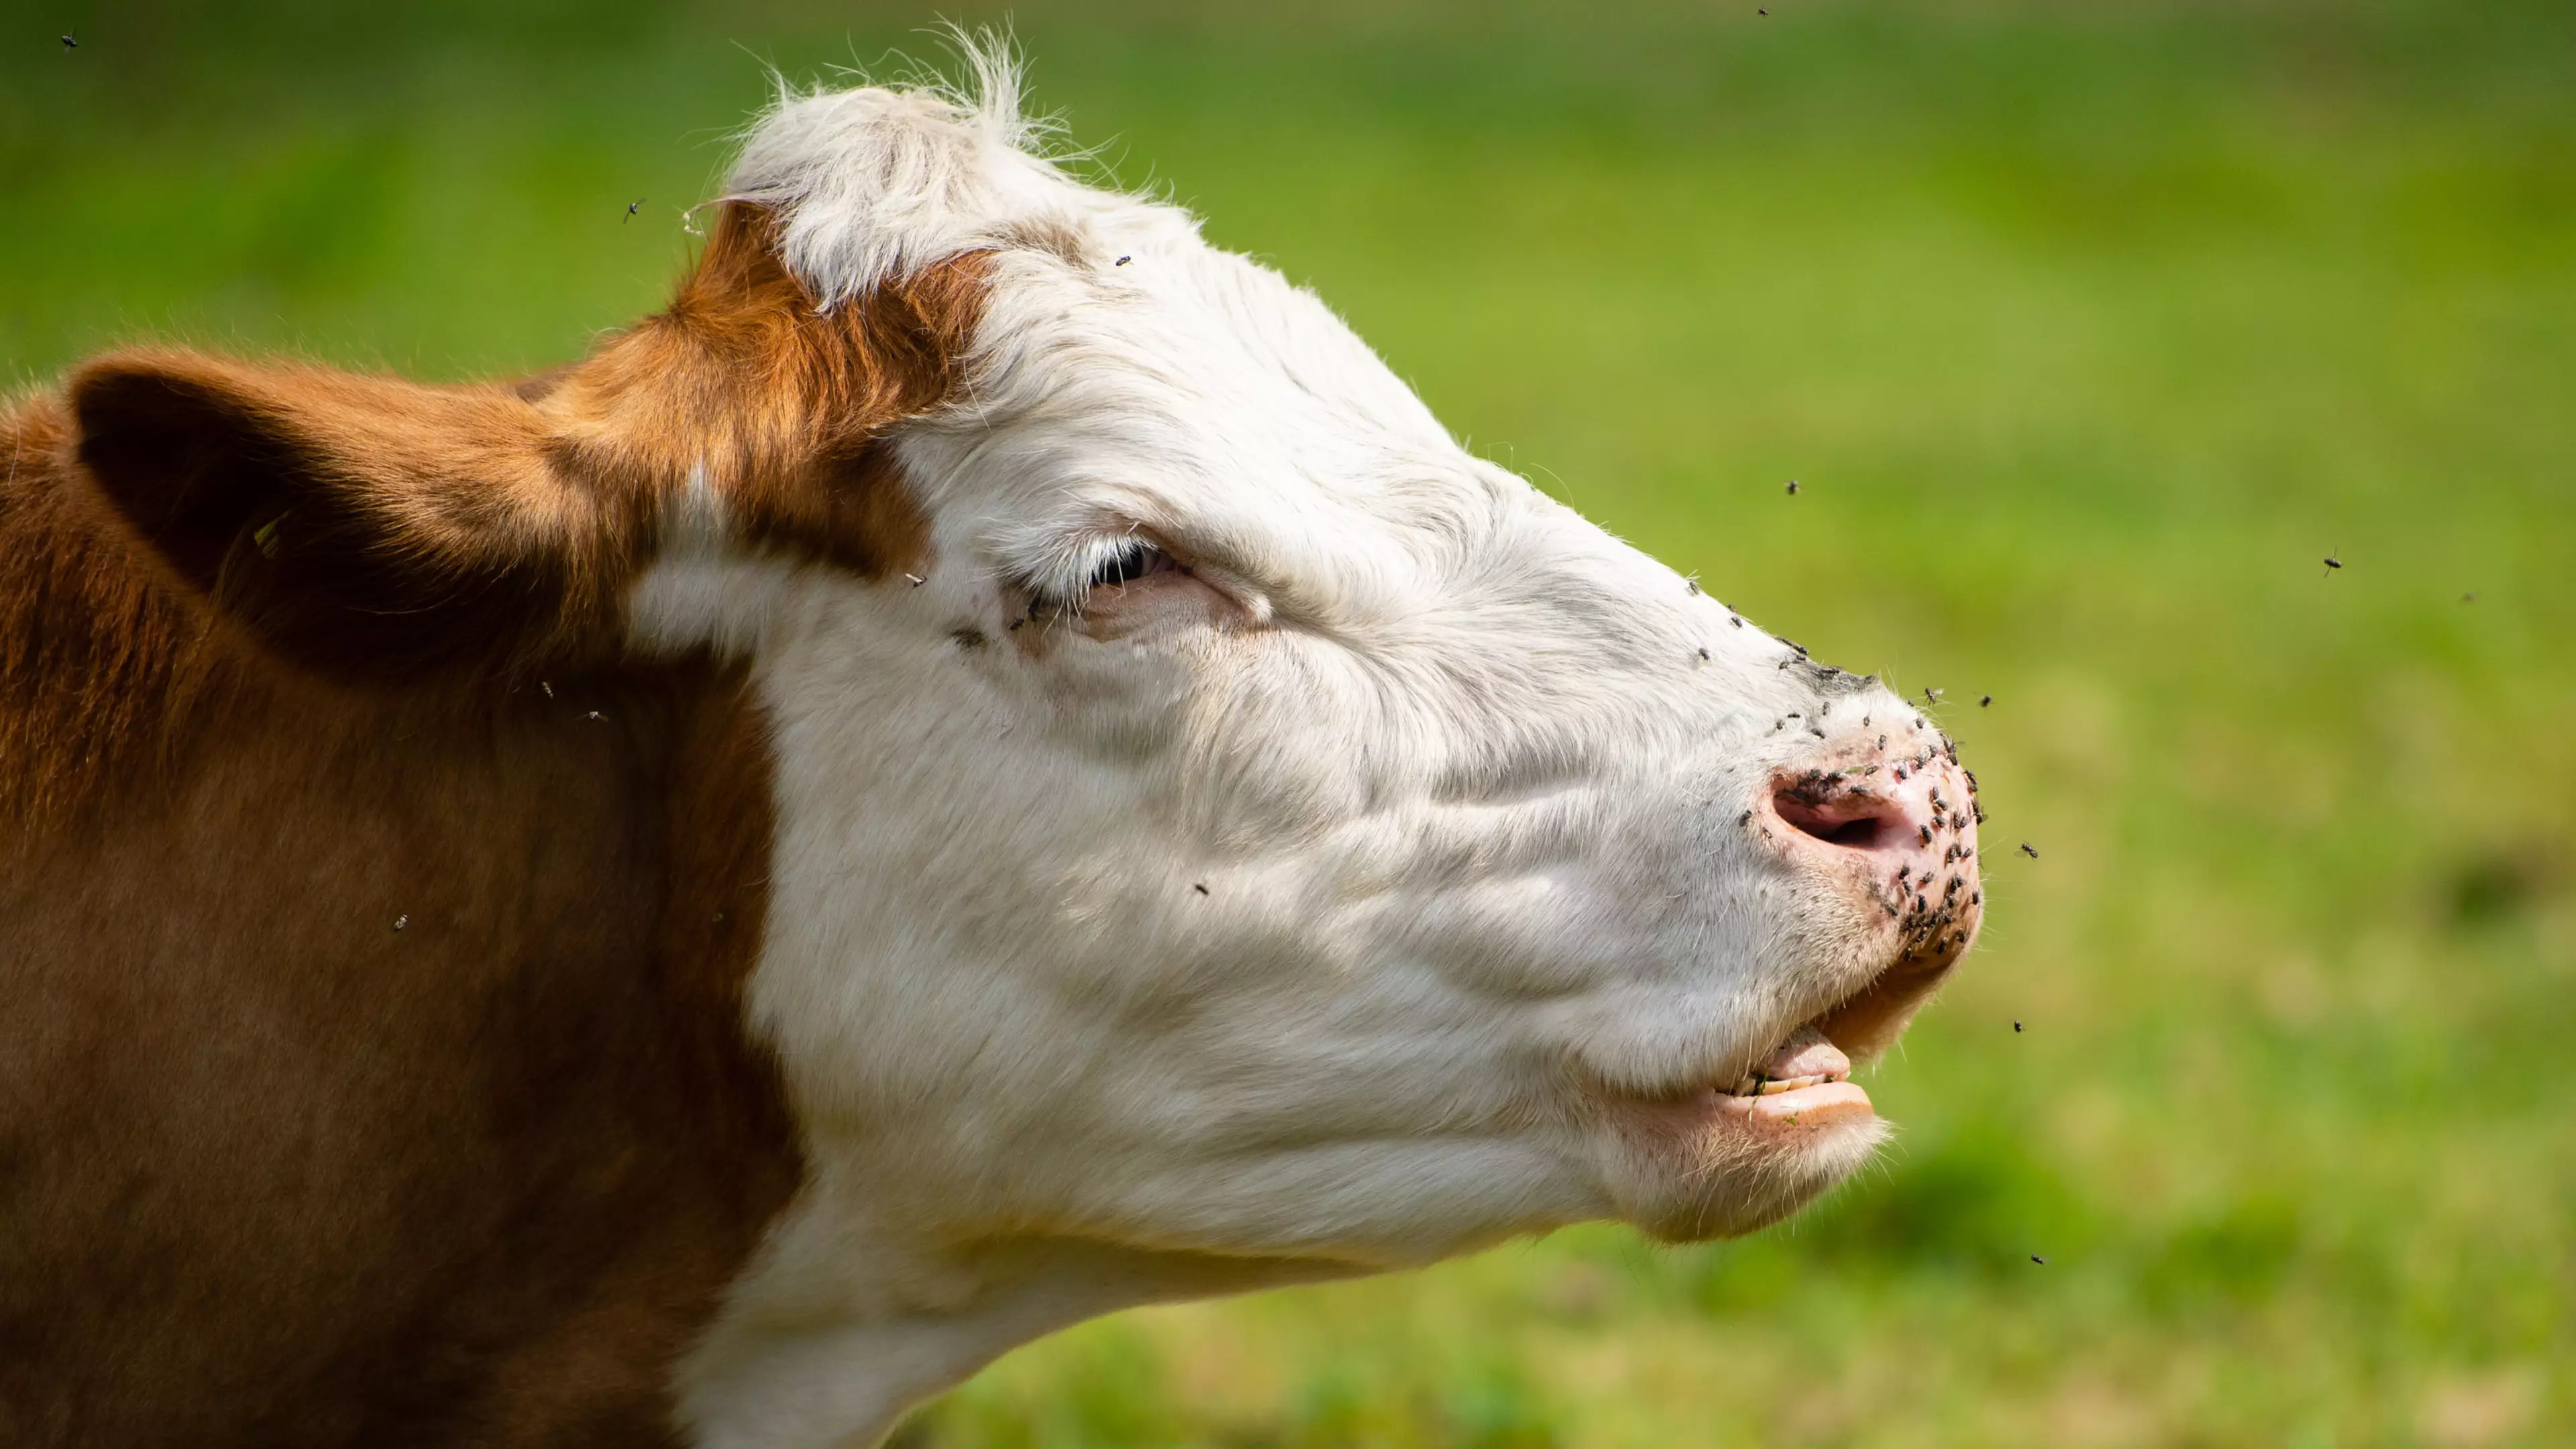 Property Owner Cops Noise Complaint From Neighbour About Cows Mooing Too Loud 